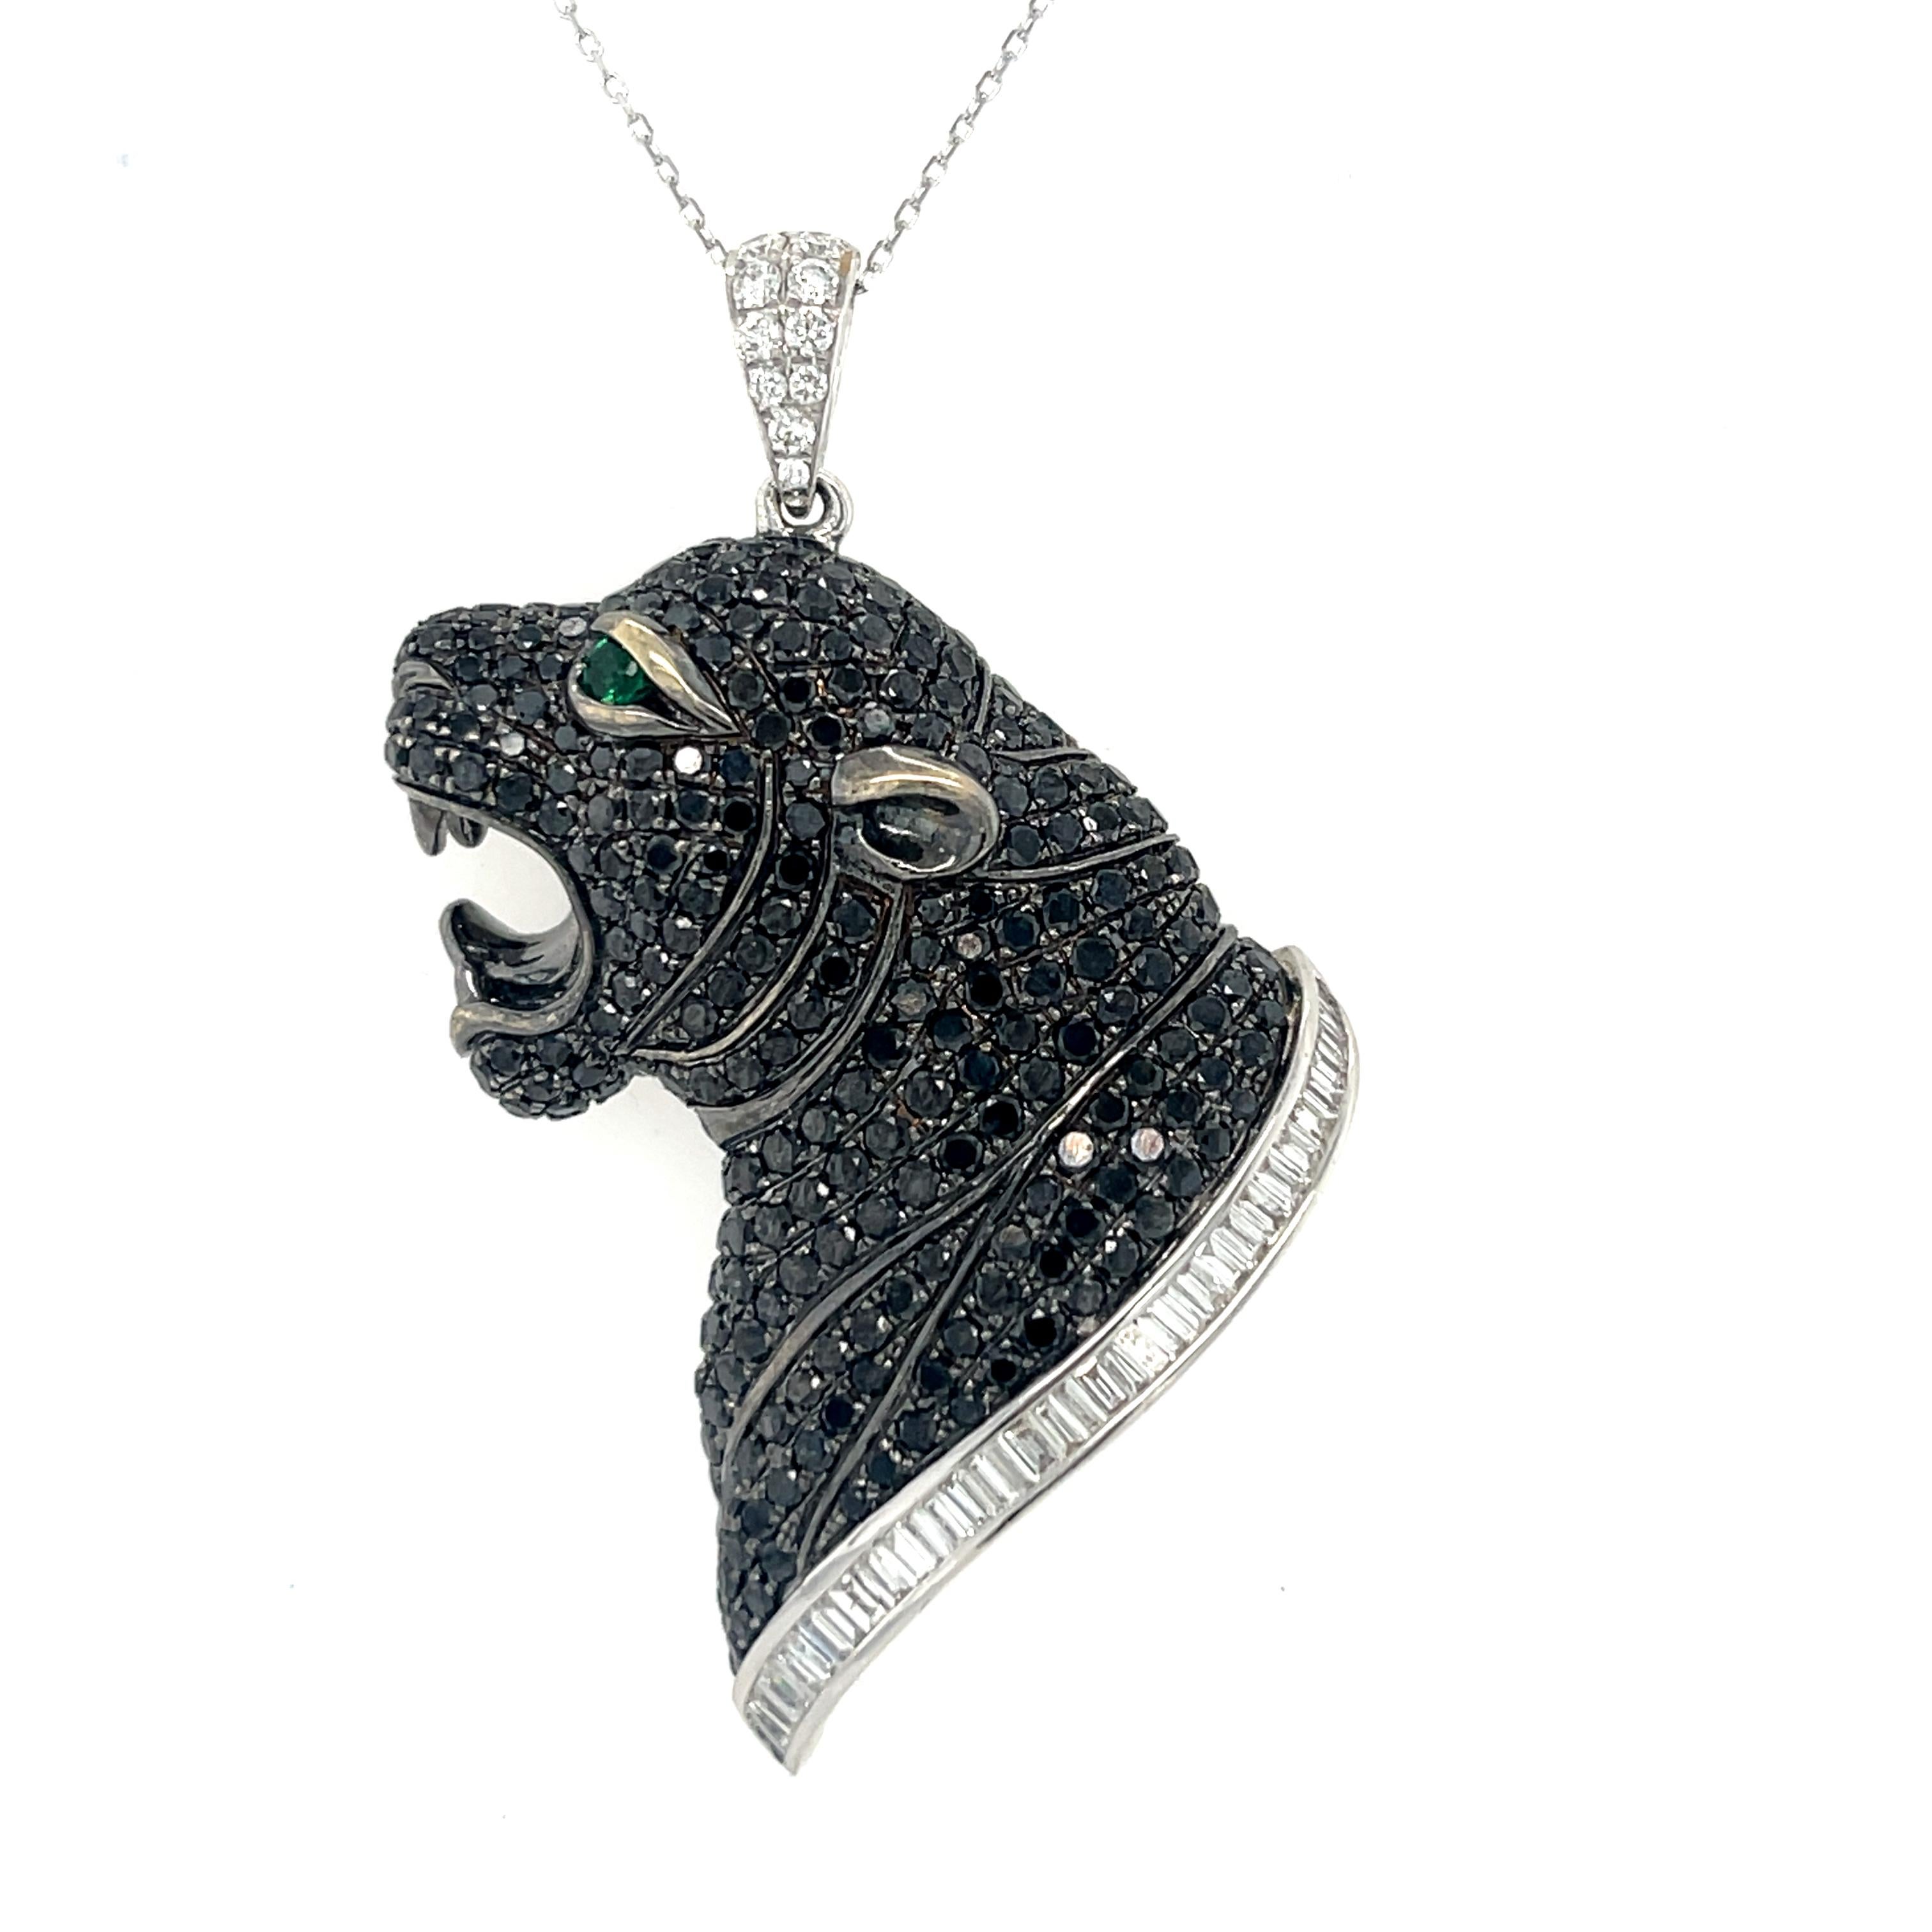 This stunning Black Panther pendant has 296 Black diamonds set in 18K White Gold. There is a natural Emerald for the eye and a row of 38 tension set White baguette diamonds. There are 10 brilliant cut round diamonds on the bale. White gold chain is